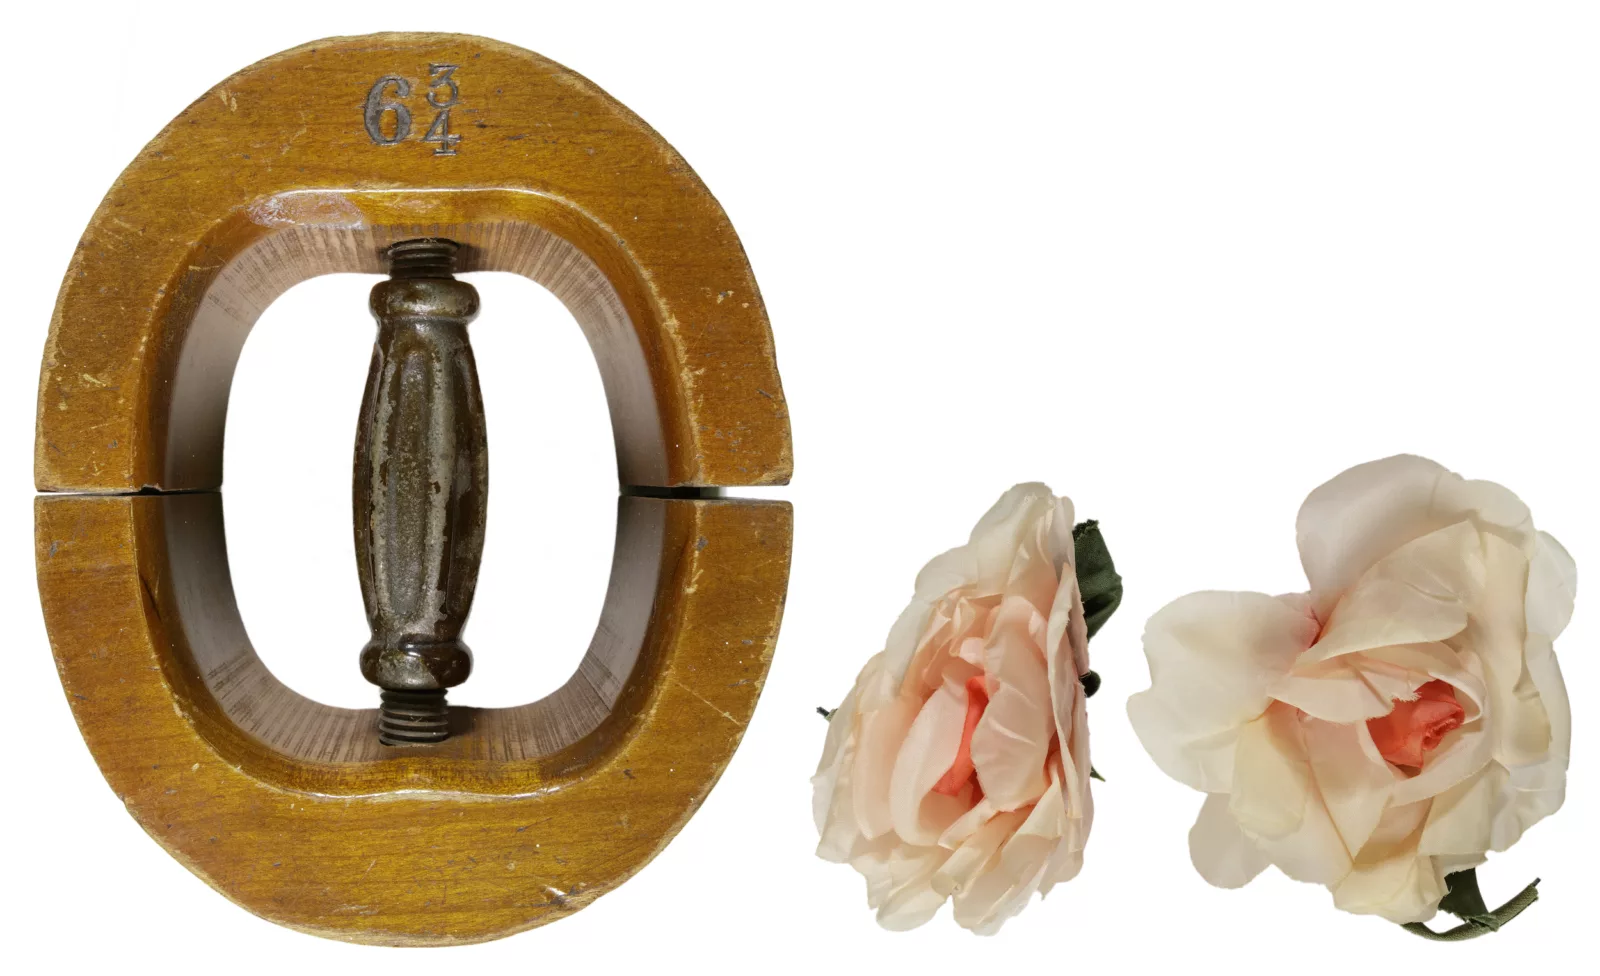 Eunice’s wooden hat stretcher and pink decorative flowers that she used in her millinery.